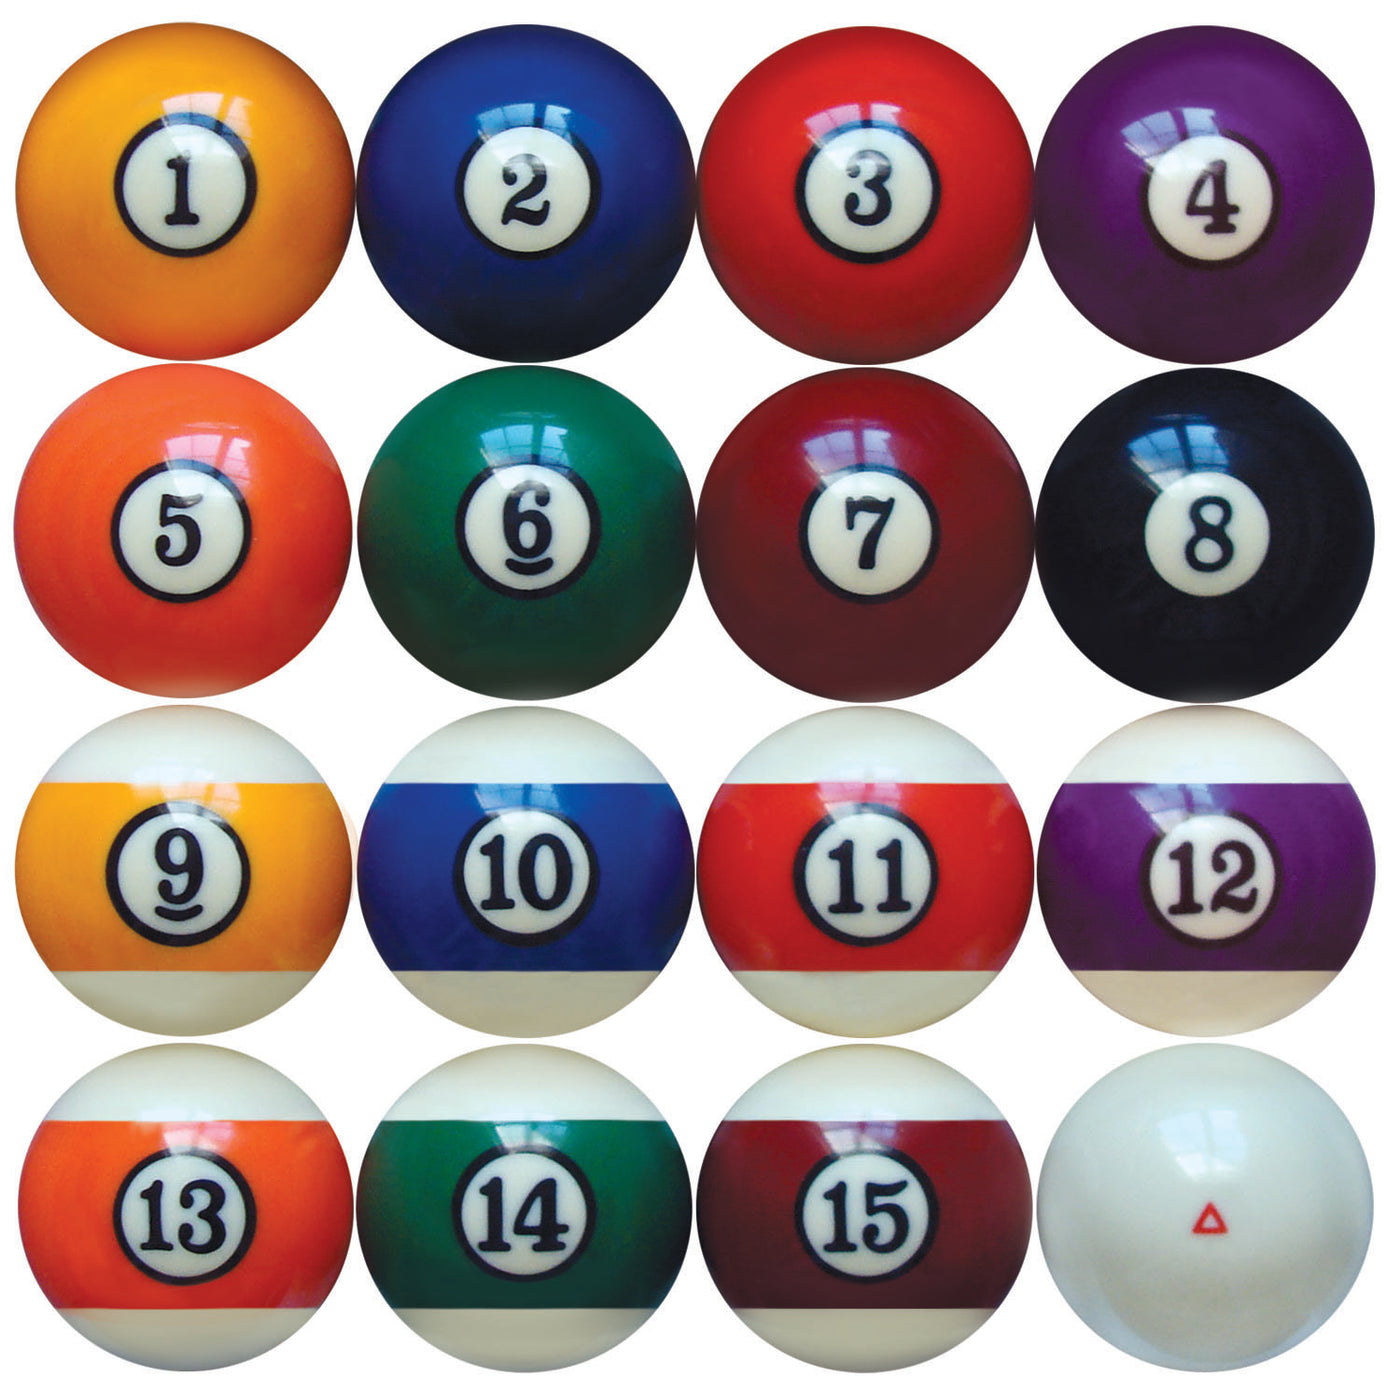 All 91+ Images what color is the four ball in pool Full HD, 2k, 4k